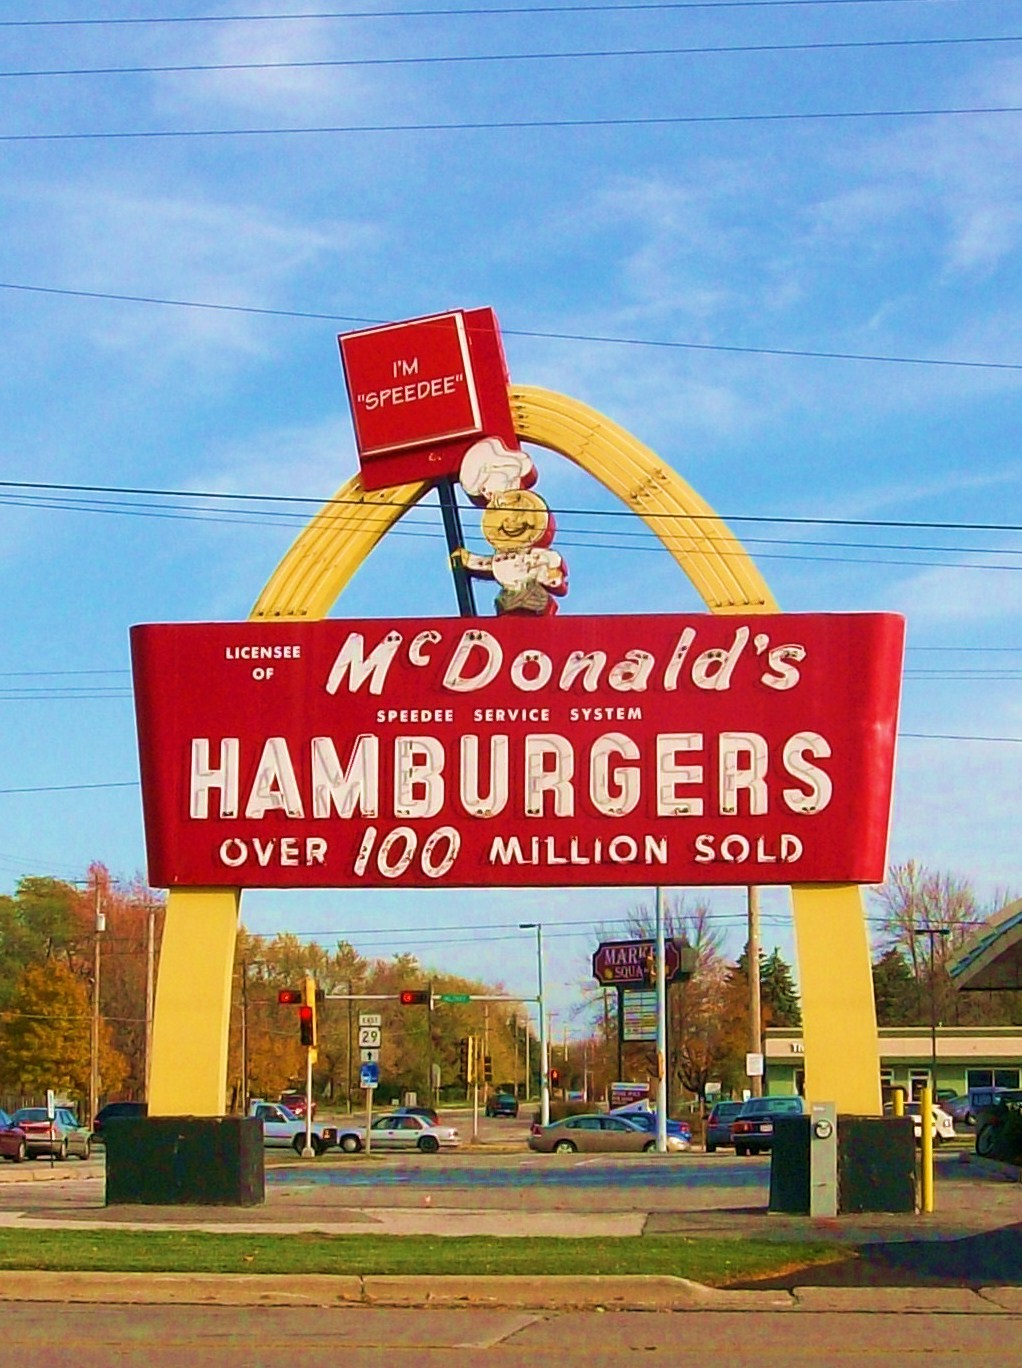 Until the late 80s to early 90s, you actually had to order your burger medium or well done because it was cooked in-house. Often you would get home to find your burger still quite pink in the middle.